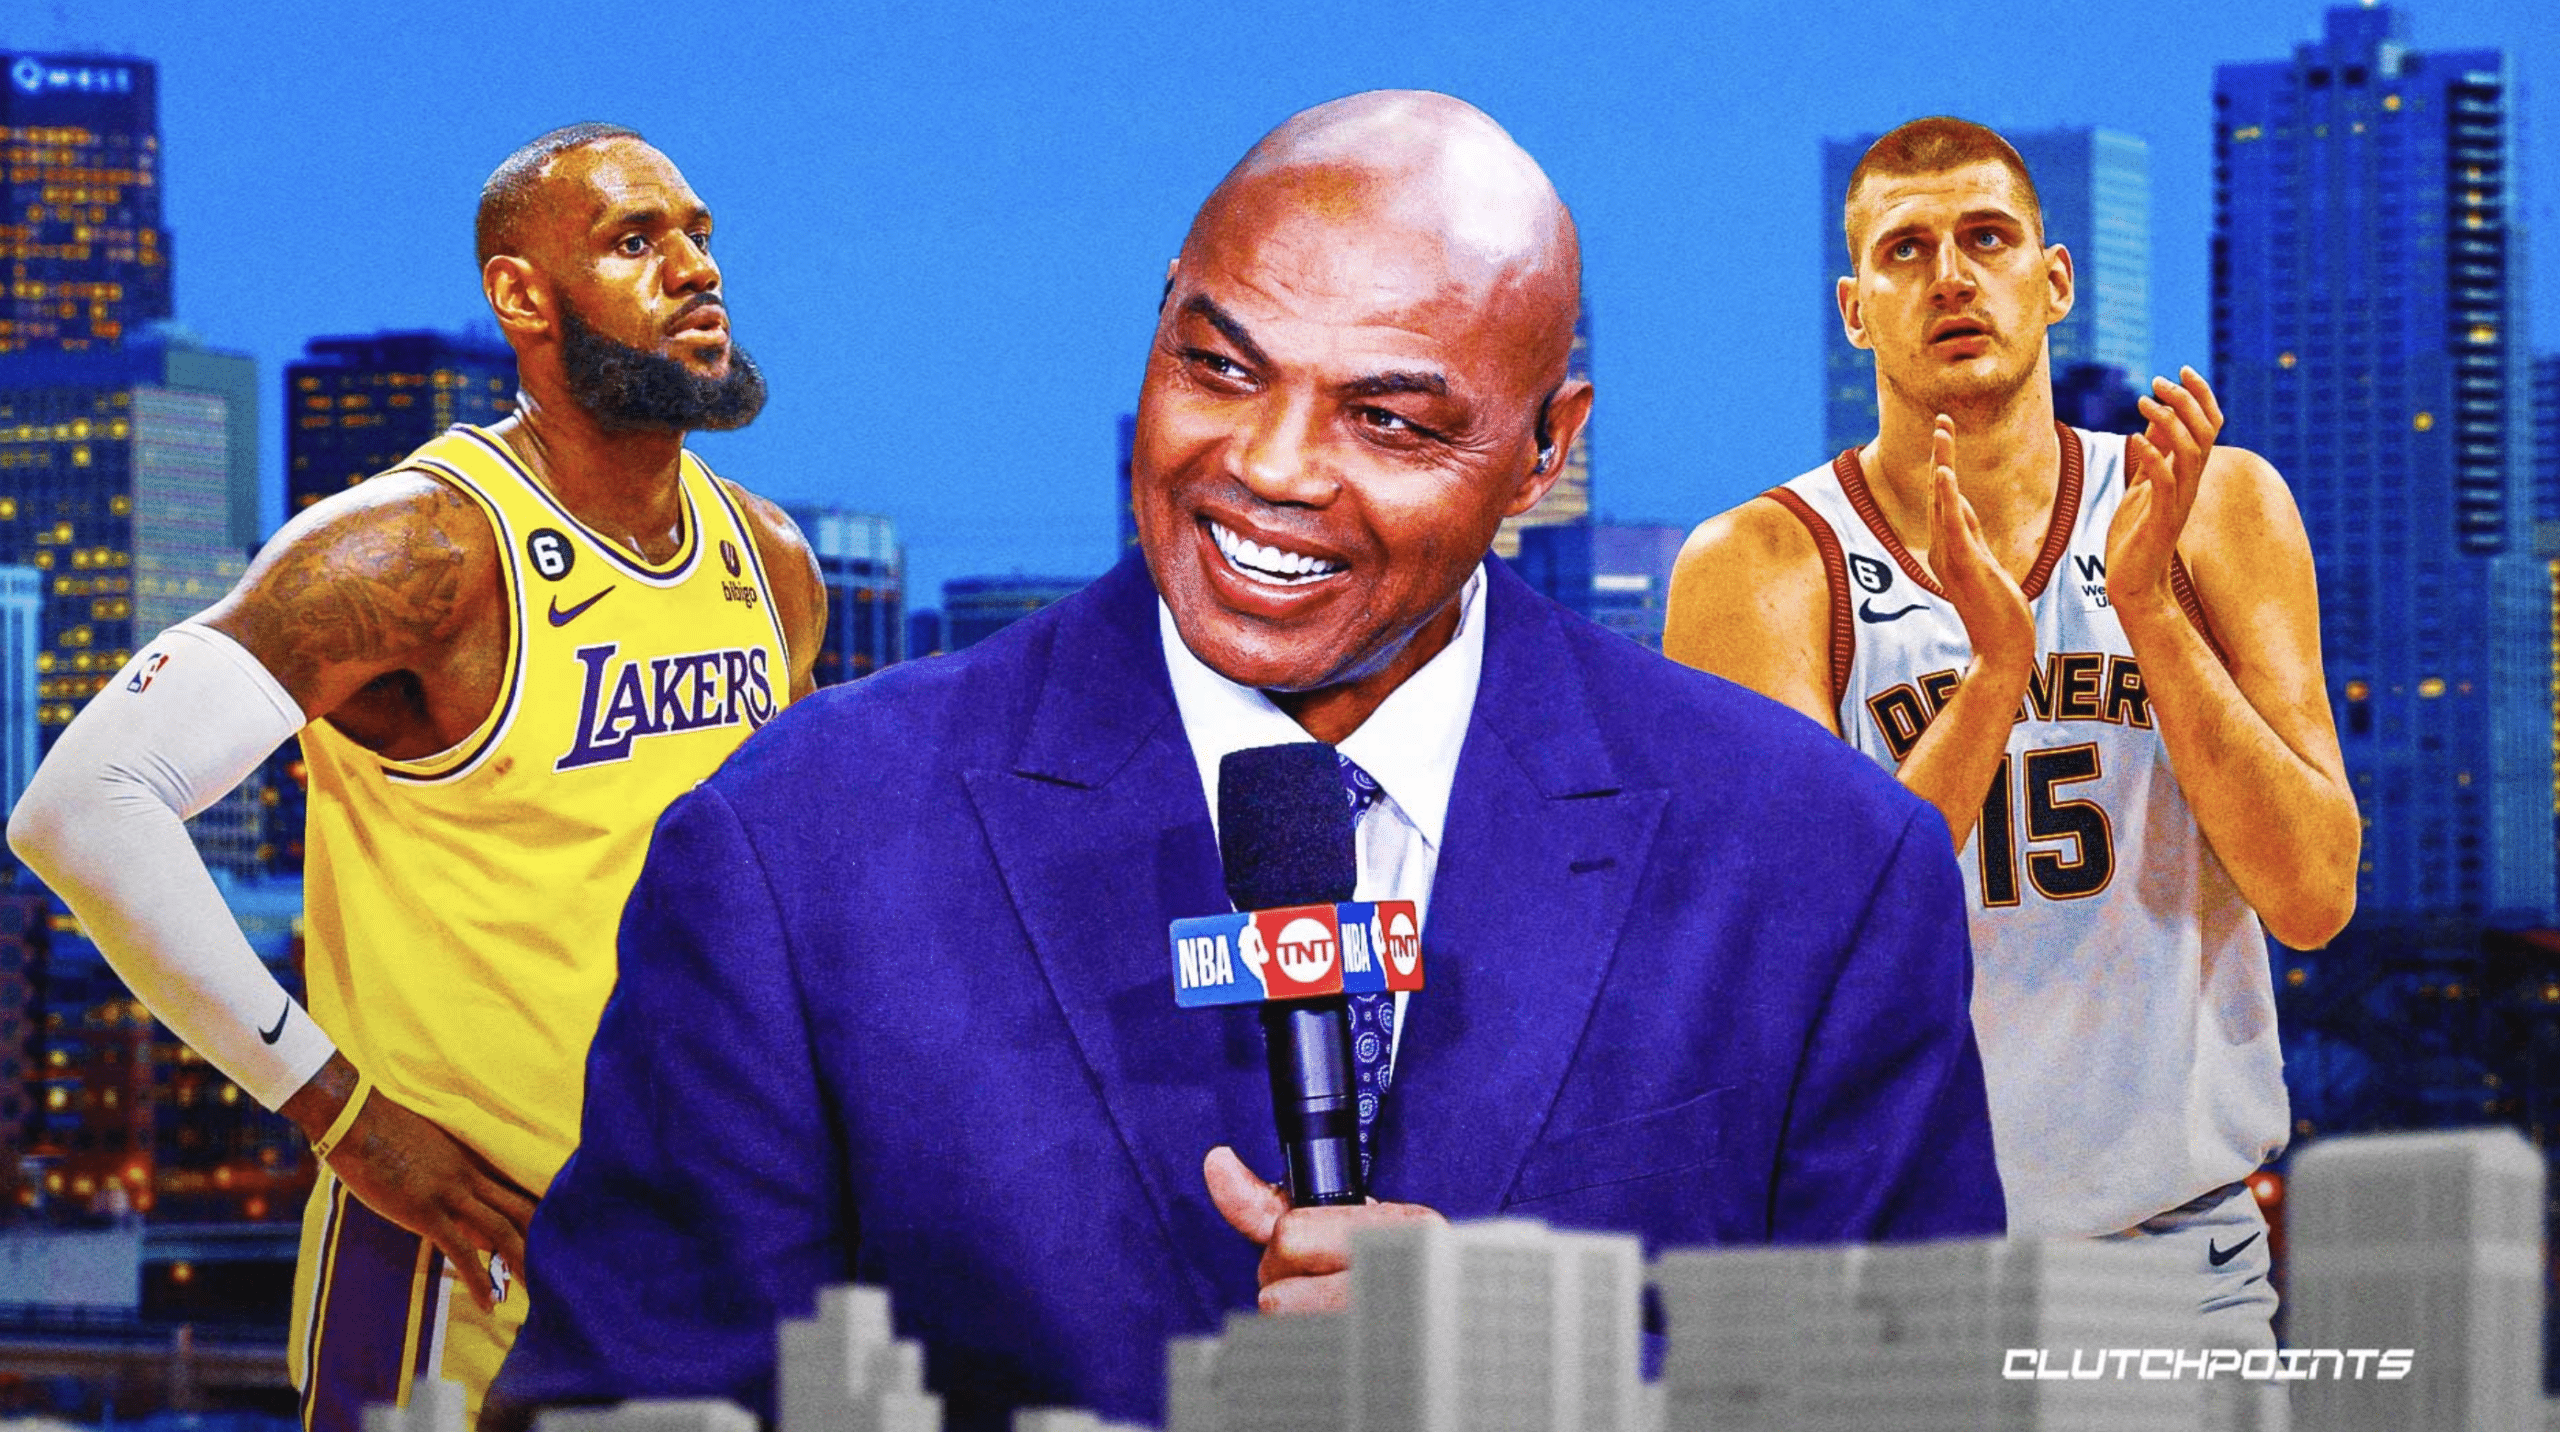 Charles Barkley 'so mad' over lack of attention toward Nuggets after sweep:  'I actually turned the TV off